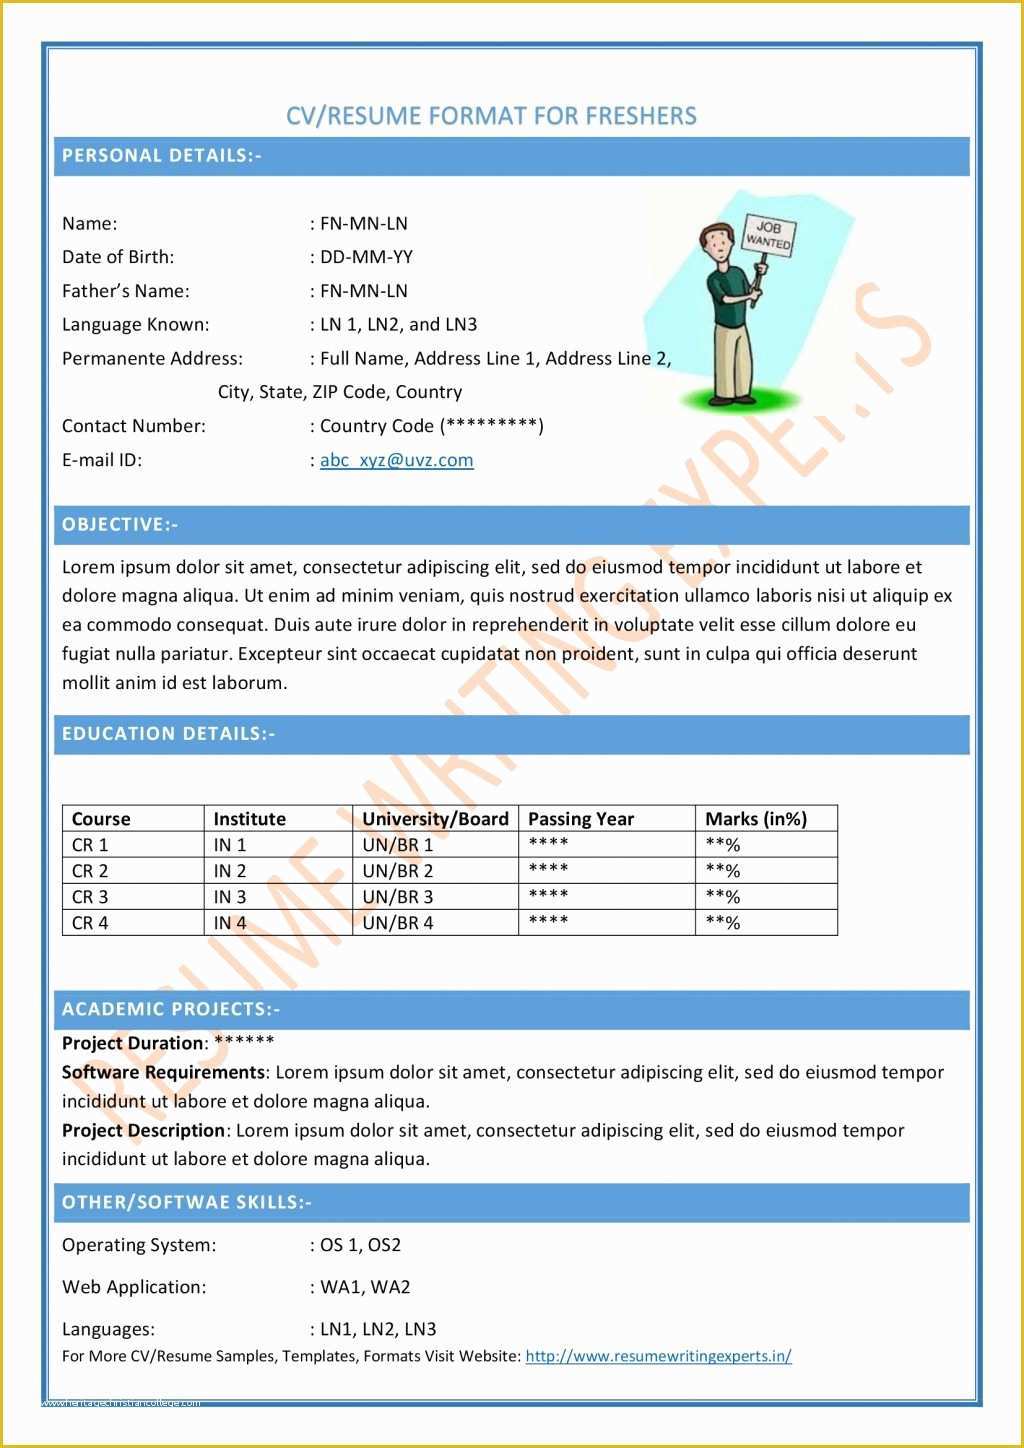 Free Windows Resume Templates Of 2019 Resume Templates Word Free Download for Windows 7 Tag